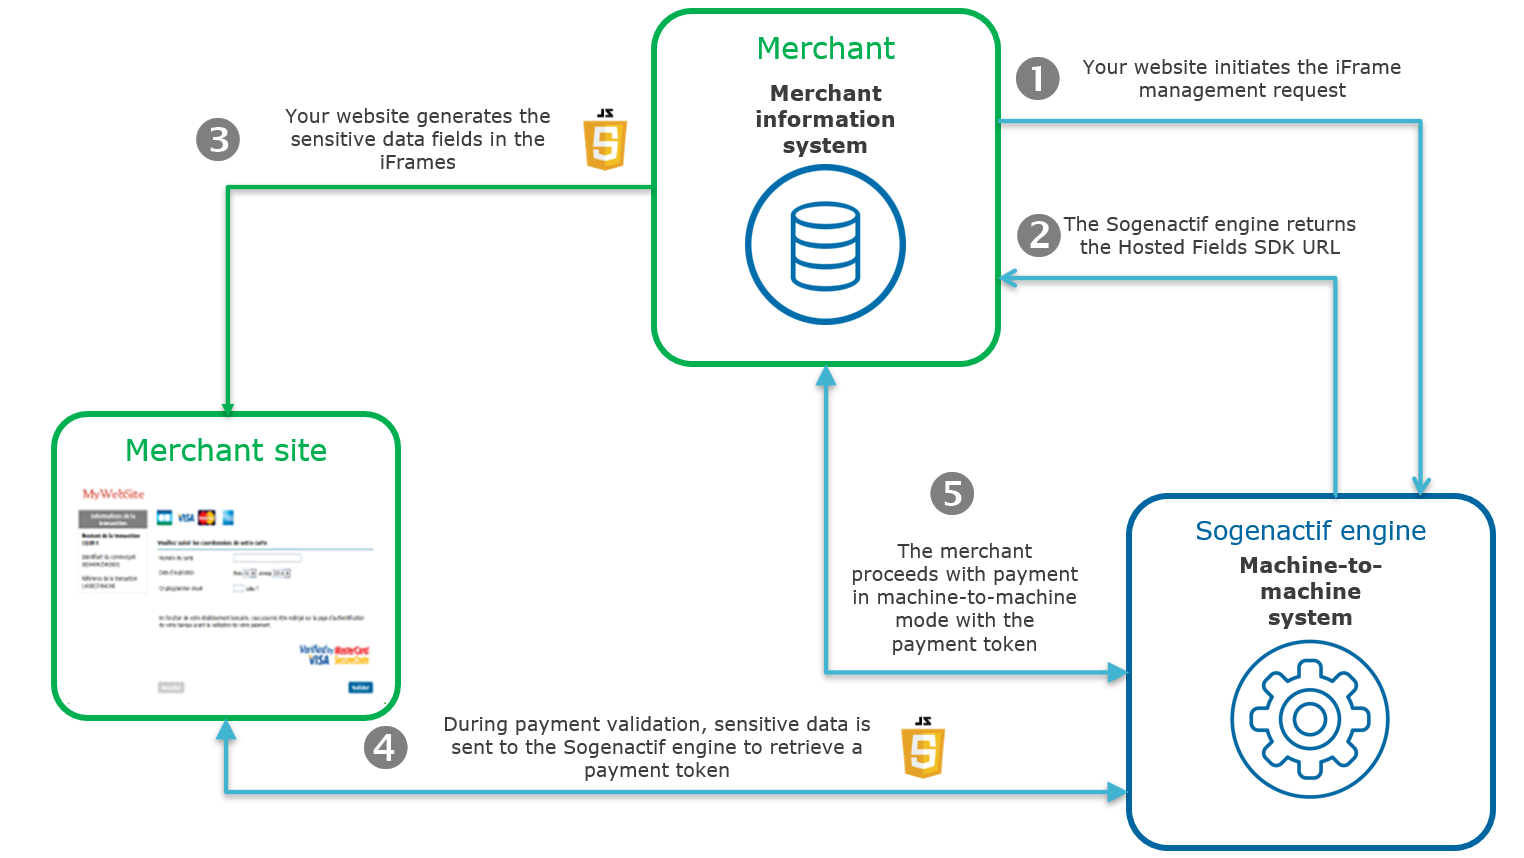 Diagram representing the payment process with the use of Hosted Fields.